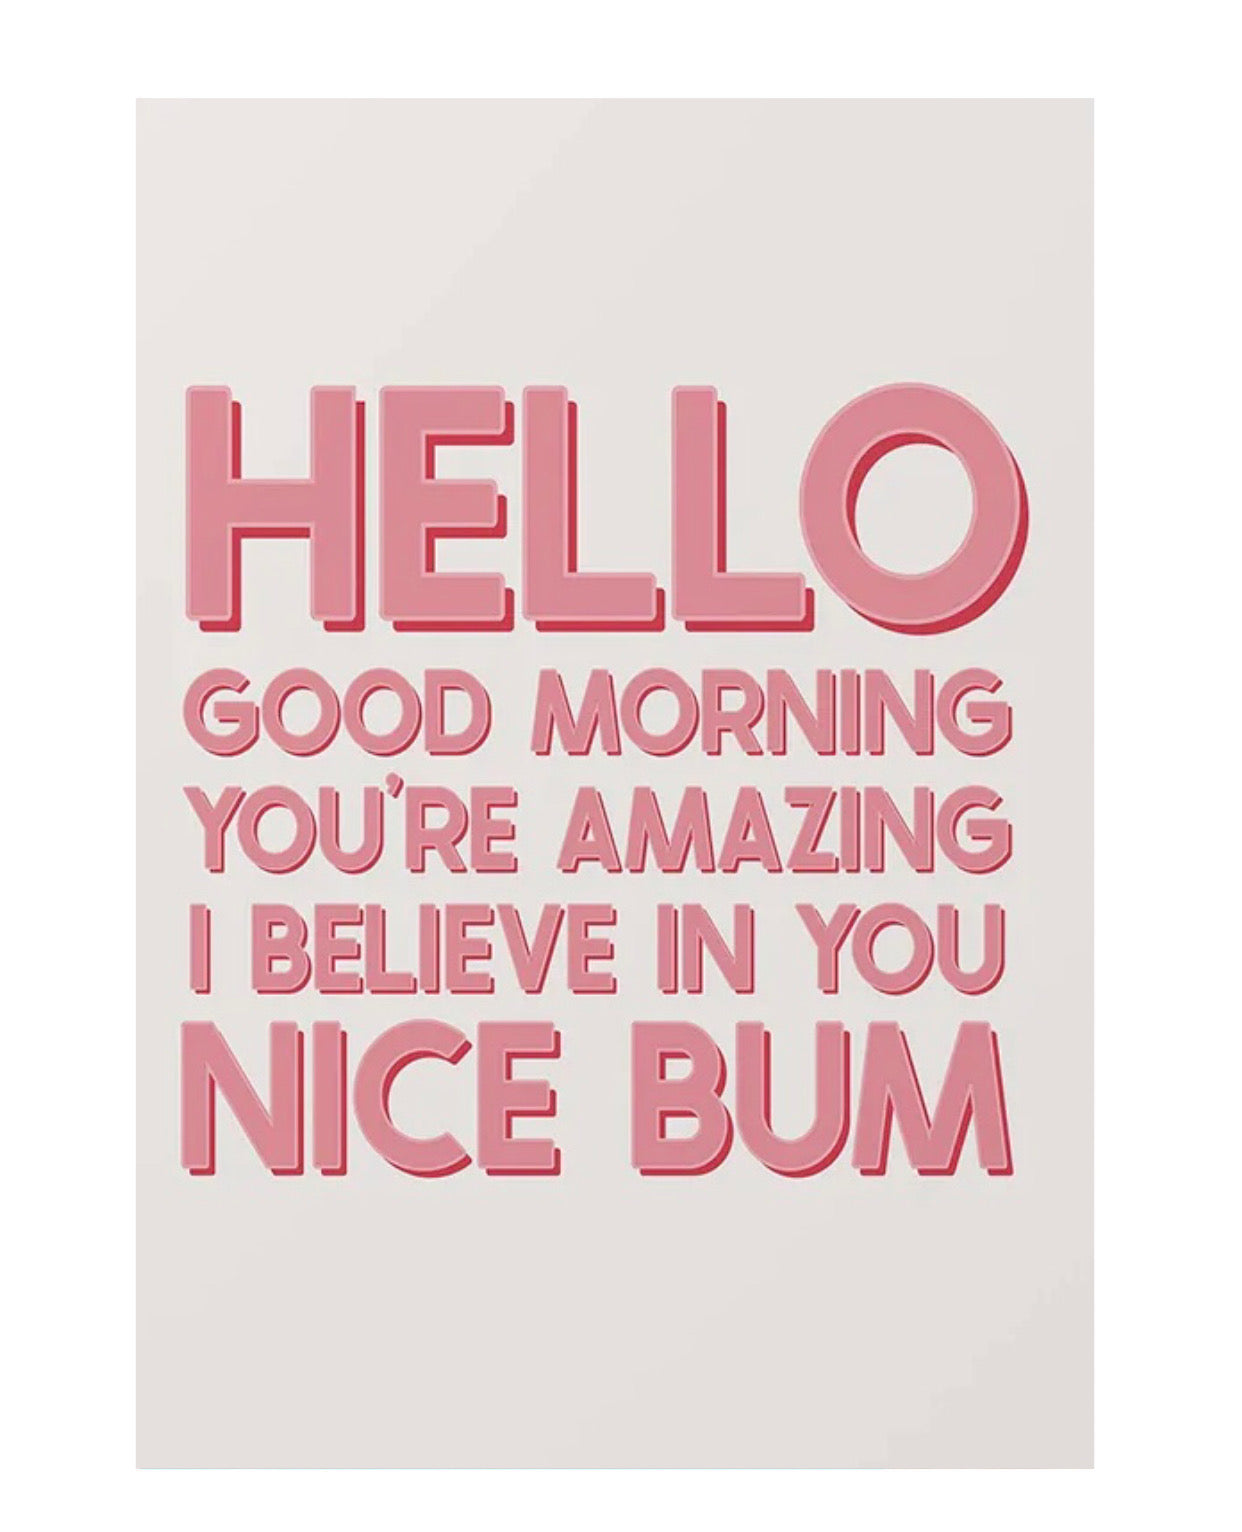 "hello, good morning you're amazing i believe in you nice bum" poster